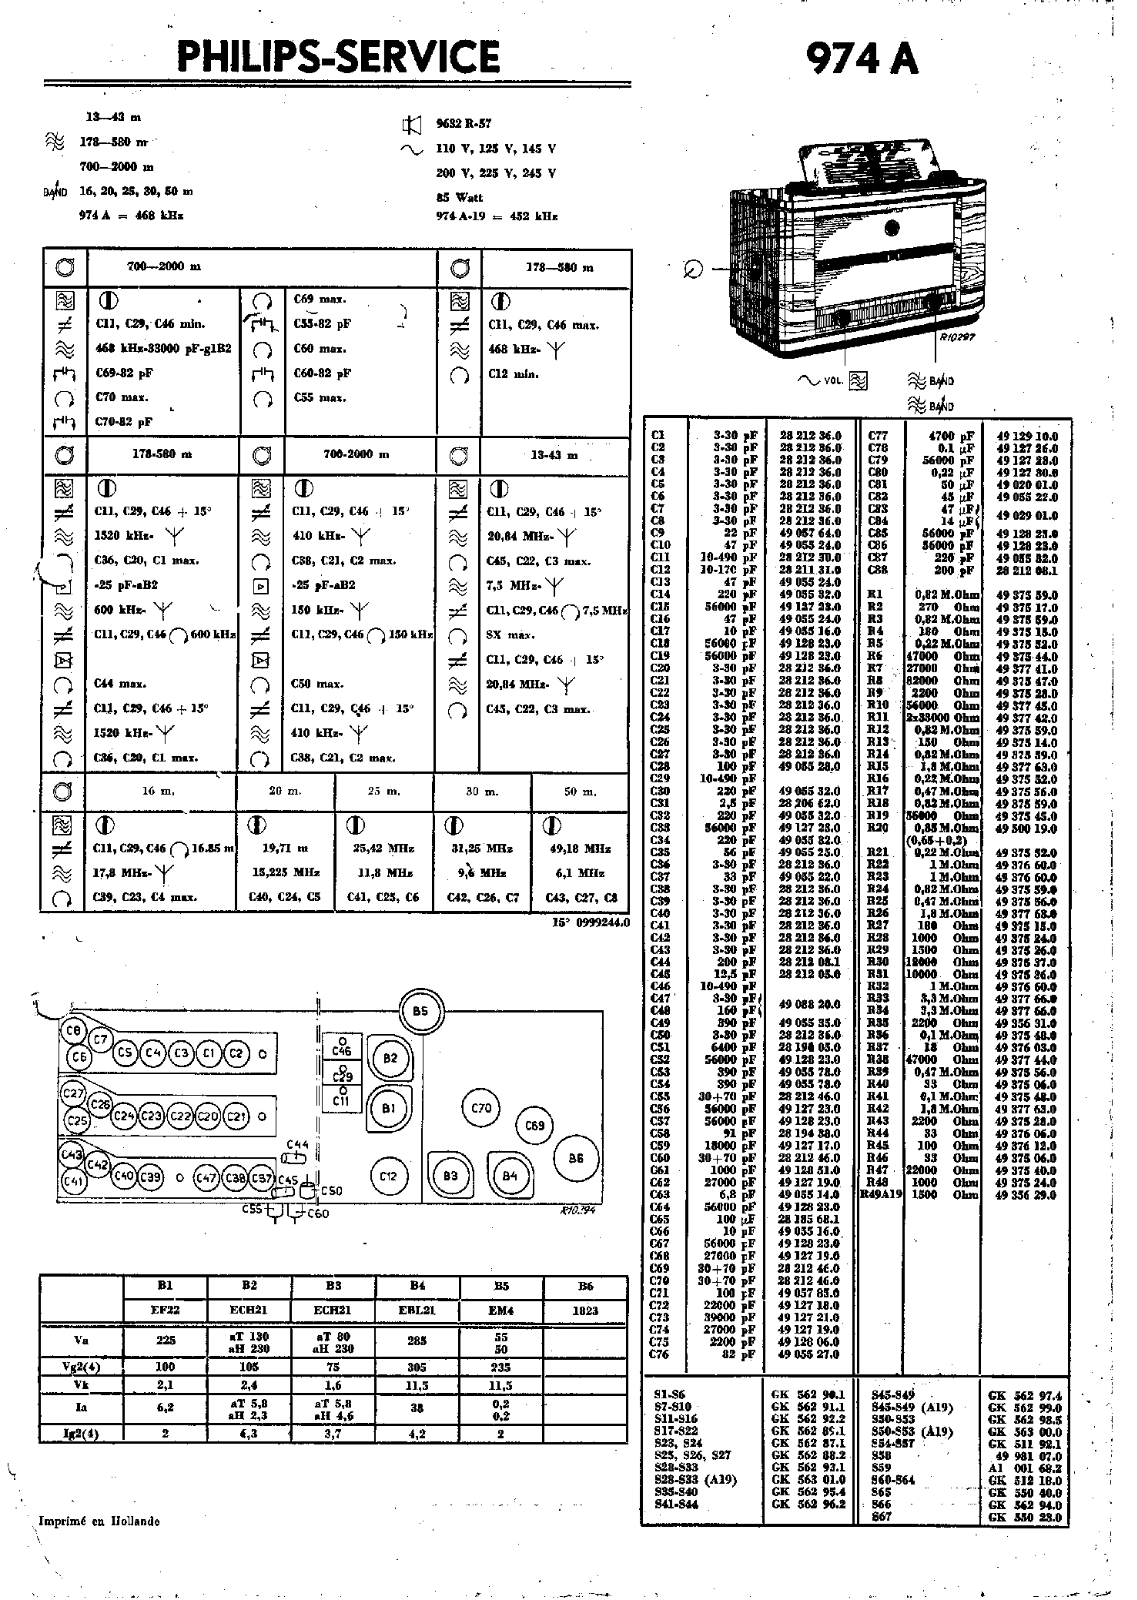 Philips 974-A Service Manual